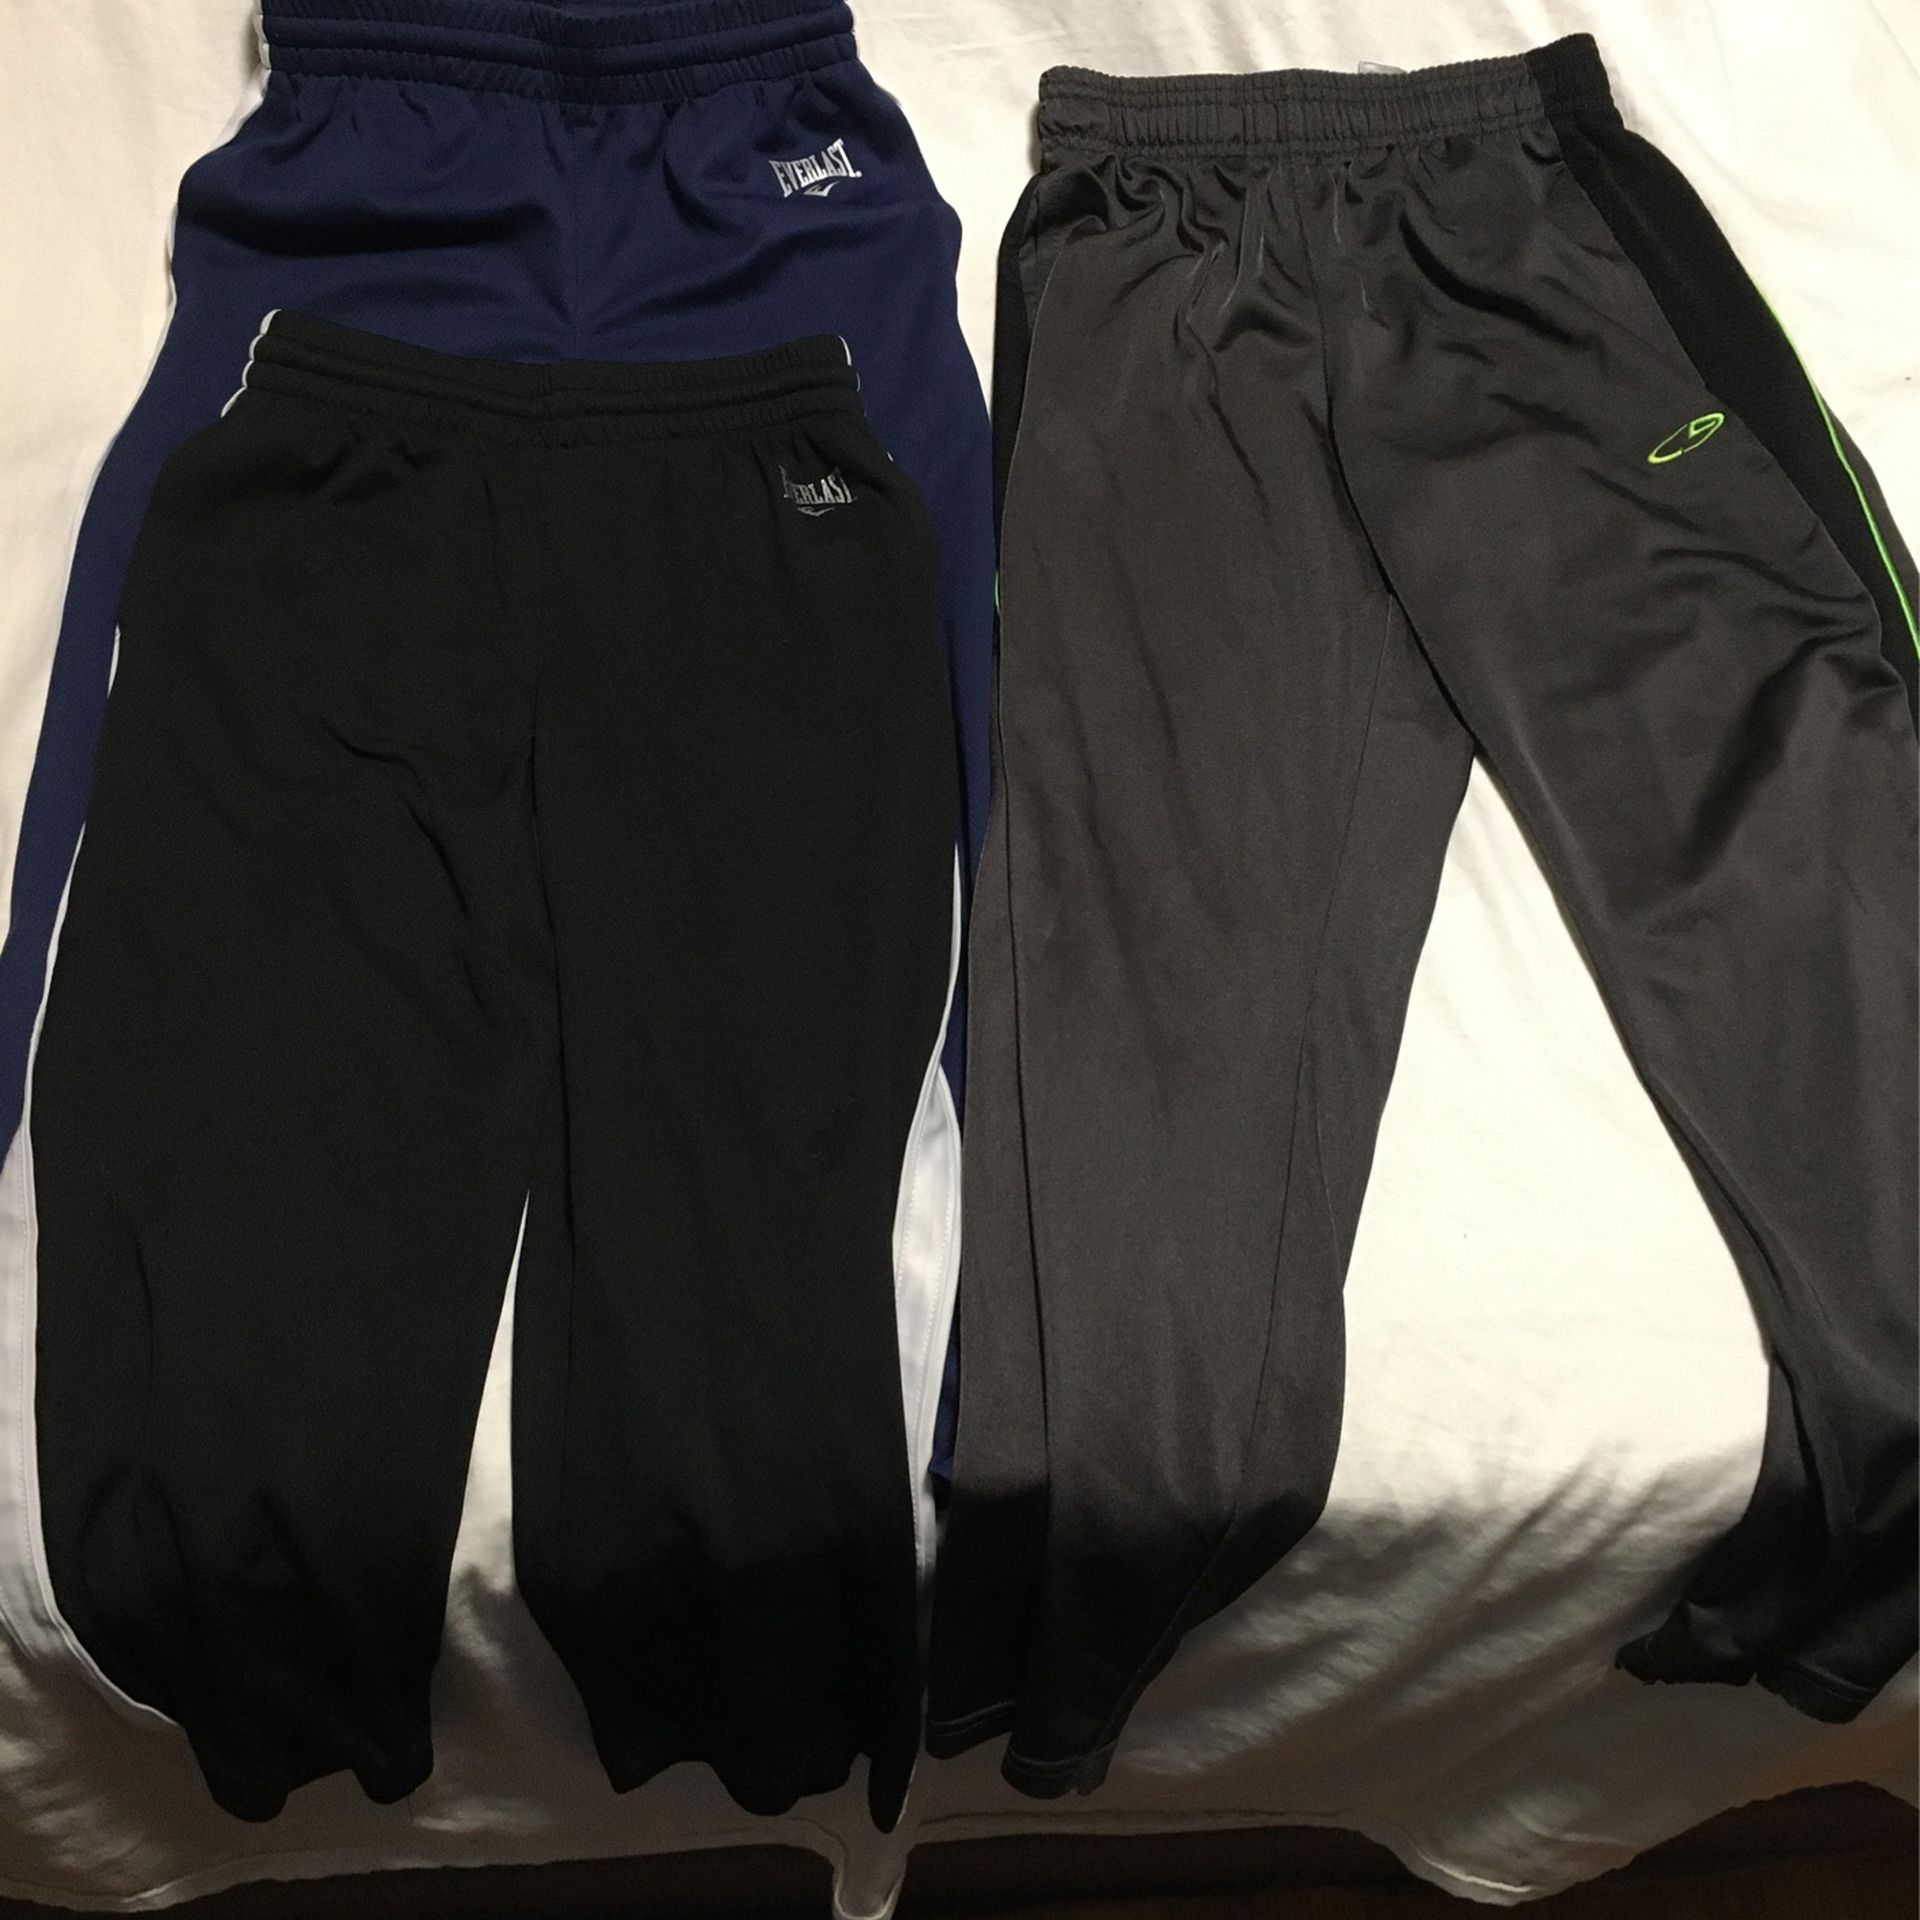 Boys Athletic Pants Size 8- Includes 3 Pairs